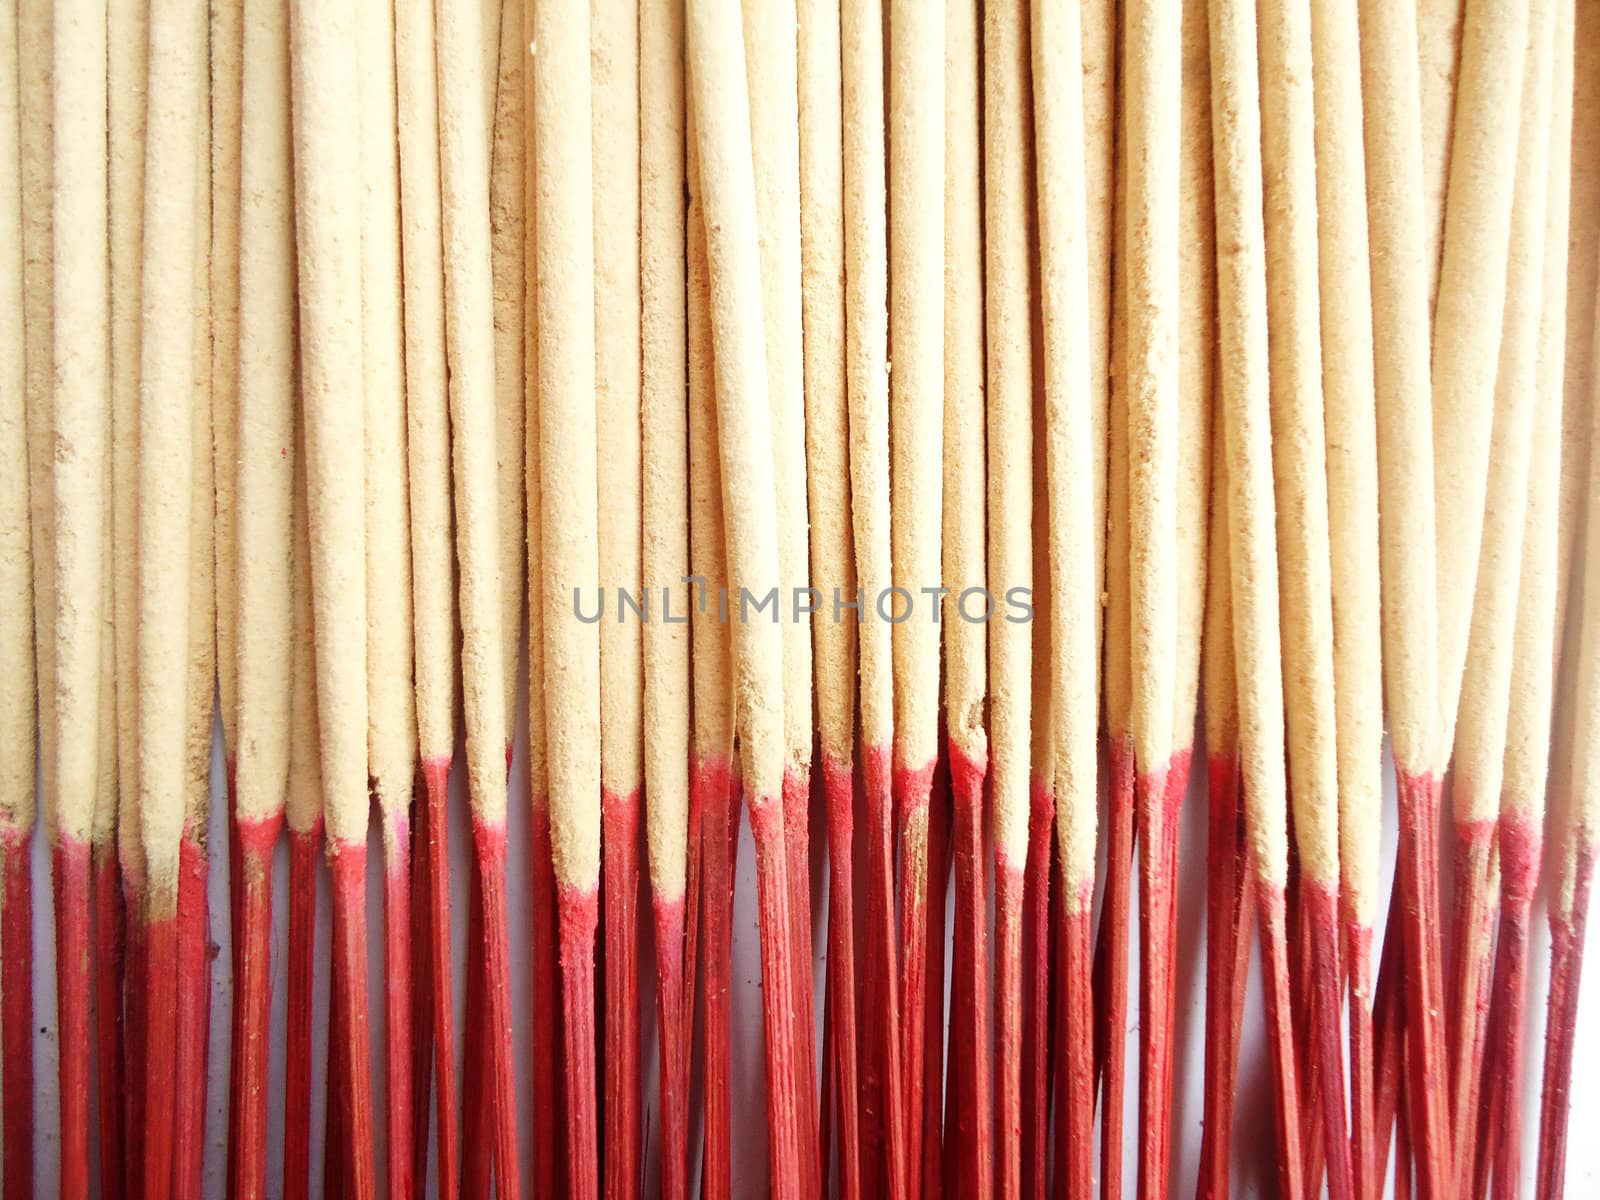 Incense stick with red wood core                             